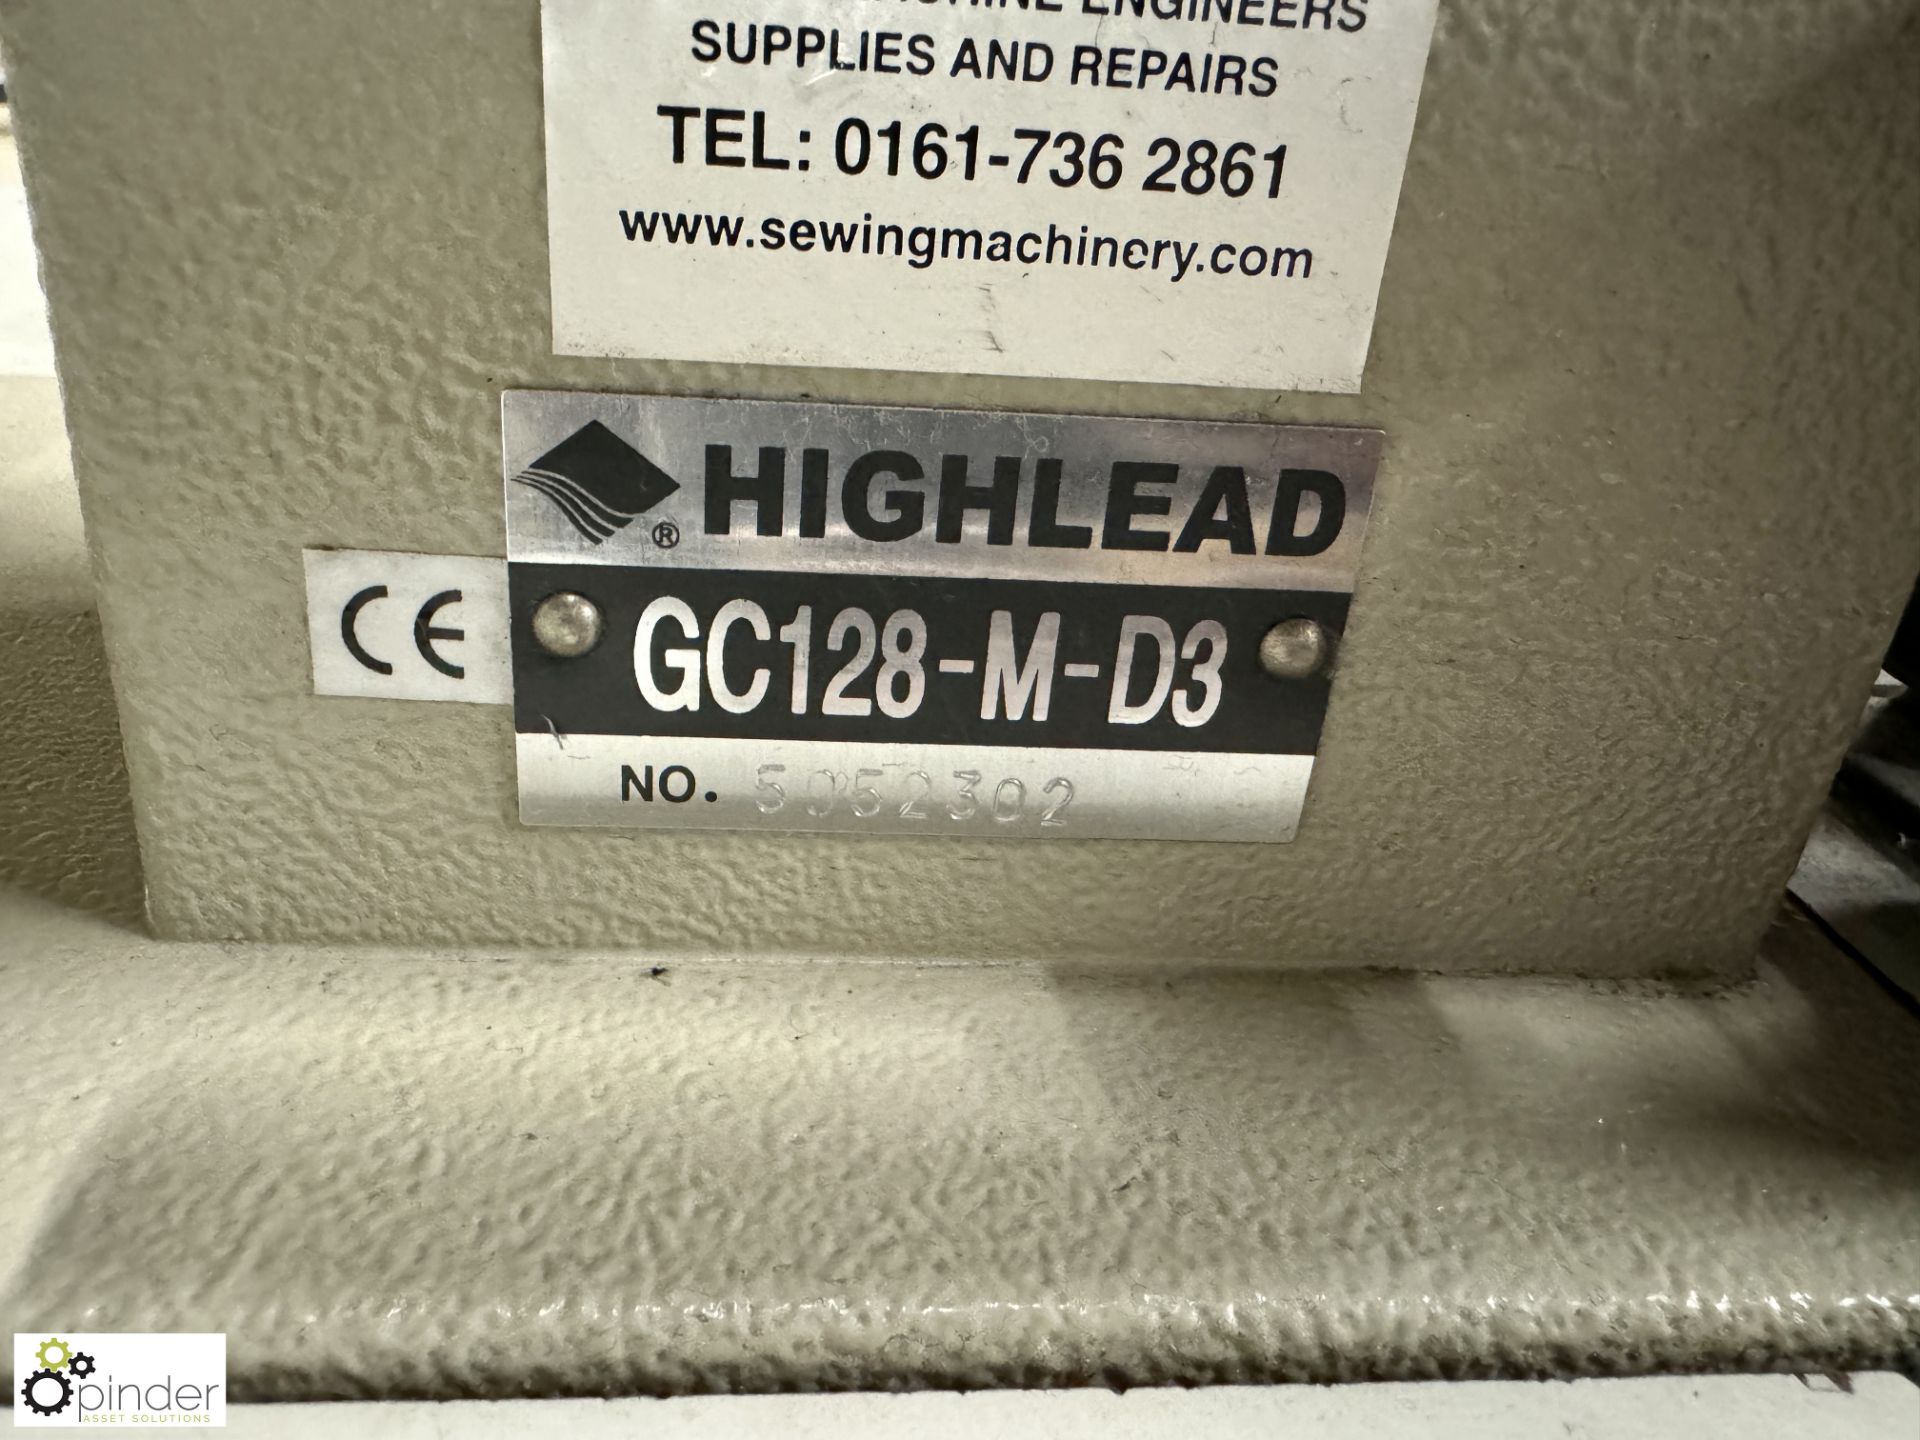 Highland GC128-M-D3 flat bed Lockstitch, 240volts, with C-60M programmable control (damaged) - Image 3 of 5